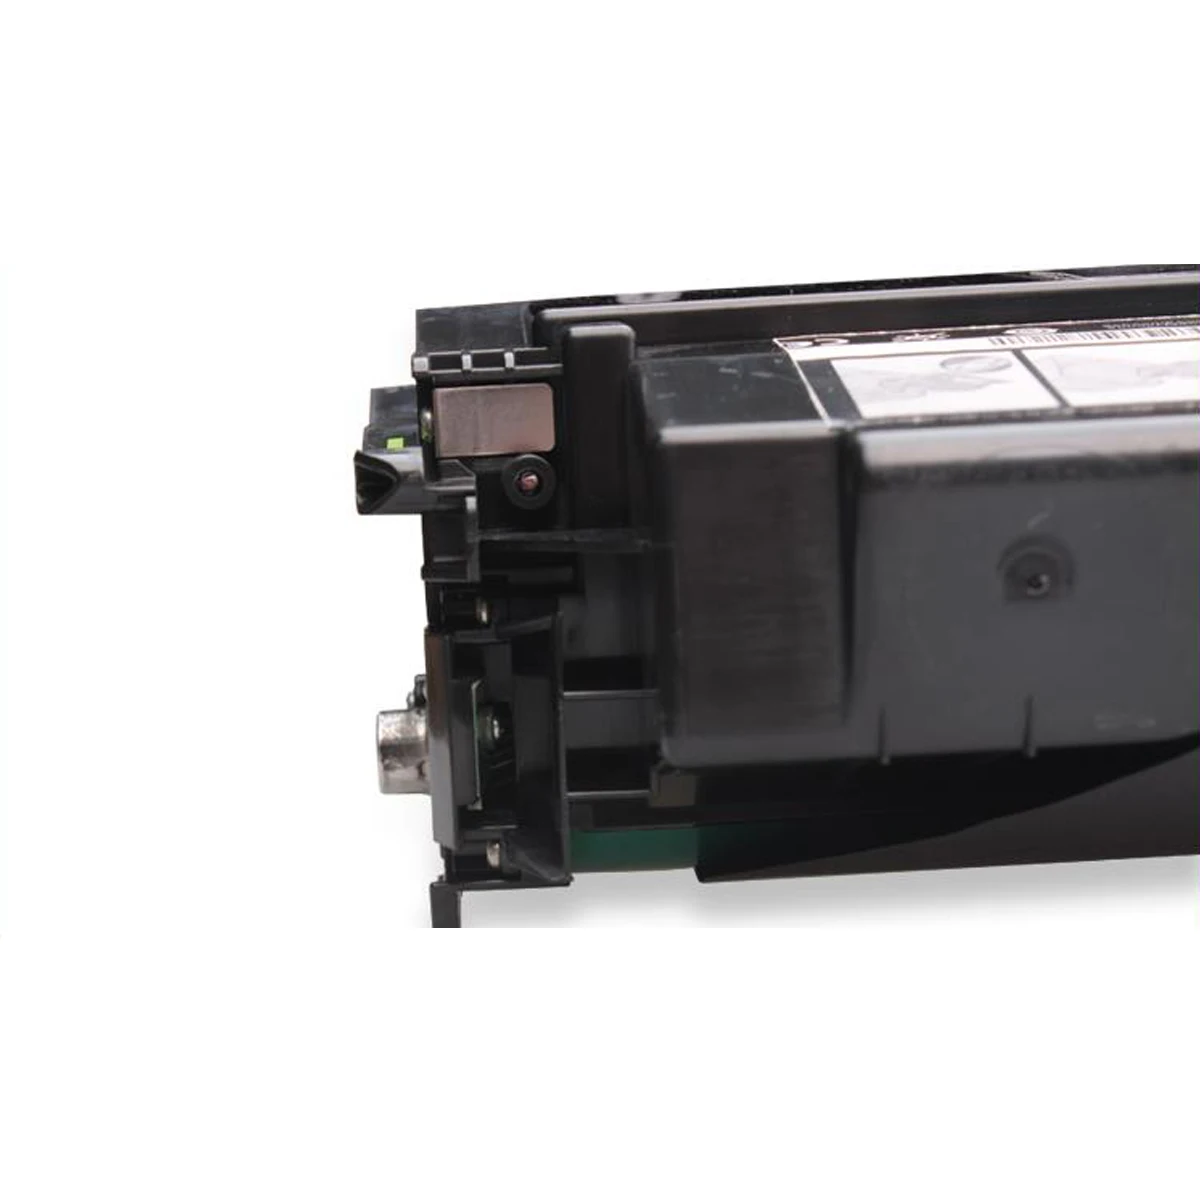 

Image Imaging Unit Drum Cartridge Reset Refill for Lexmark MS 310 MS 312 MS 315 MS 410 MS 415 MS 510 d dn dnw de dte dtn mfp